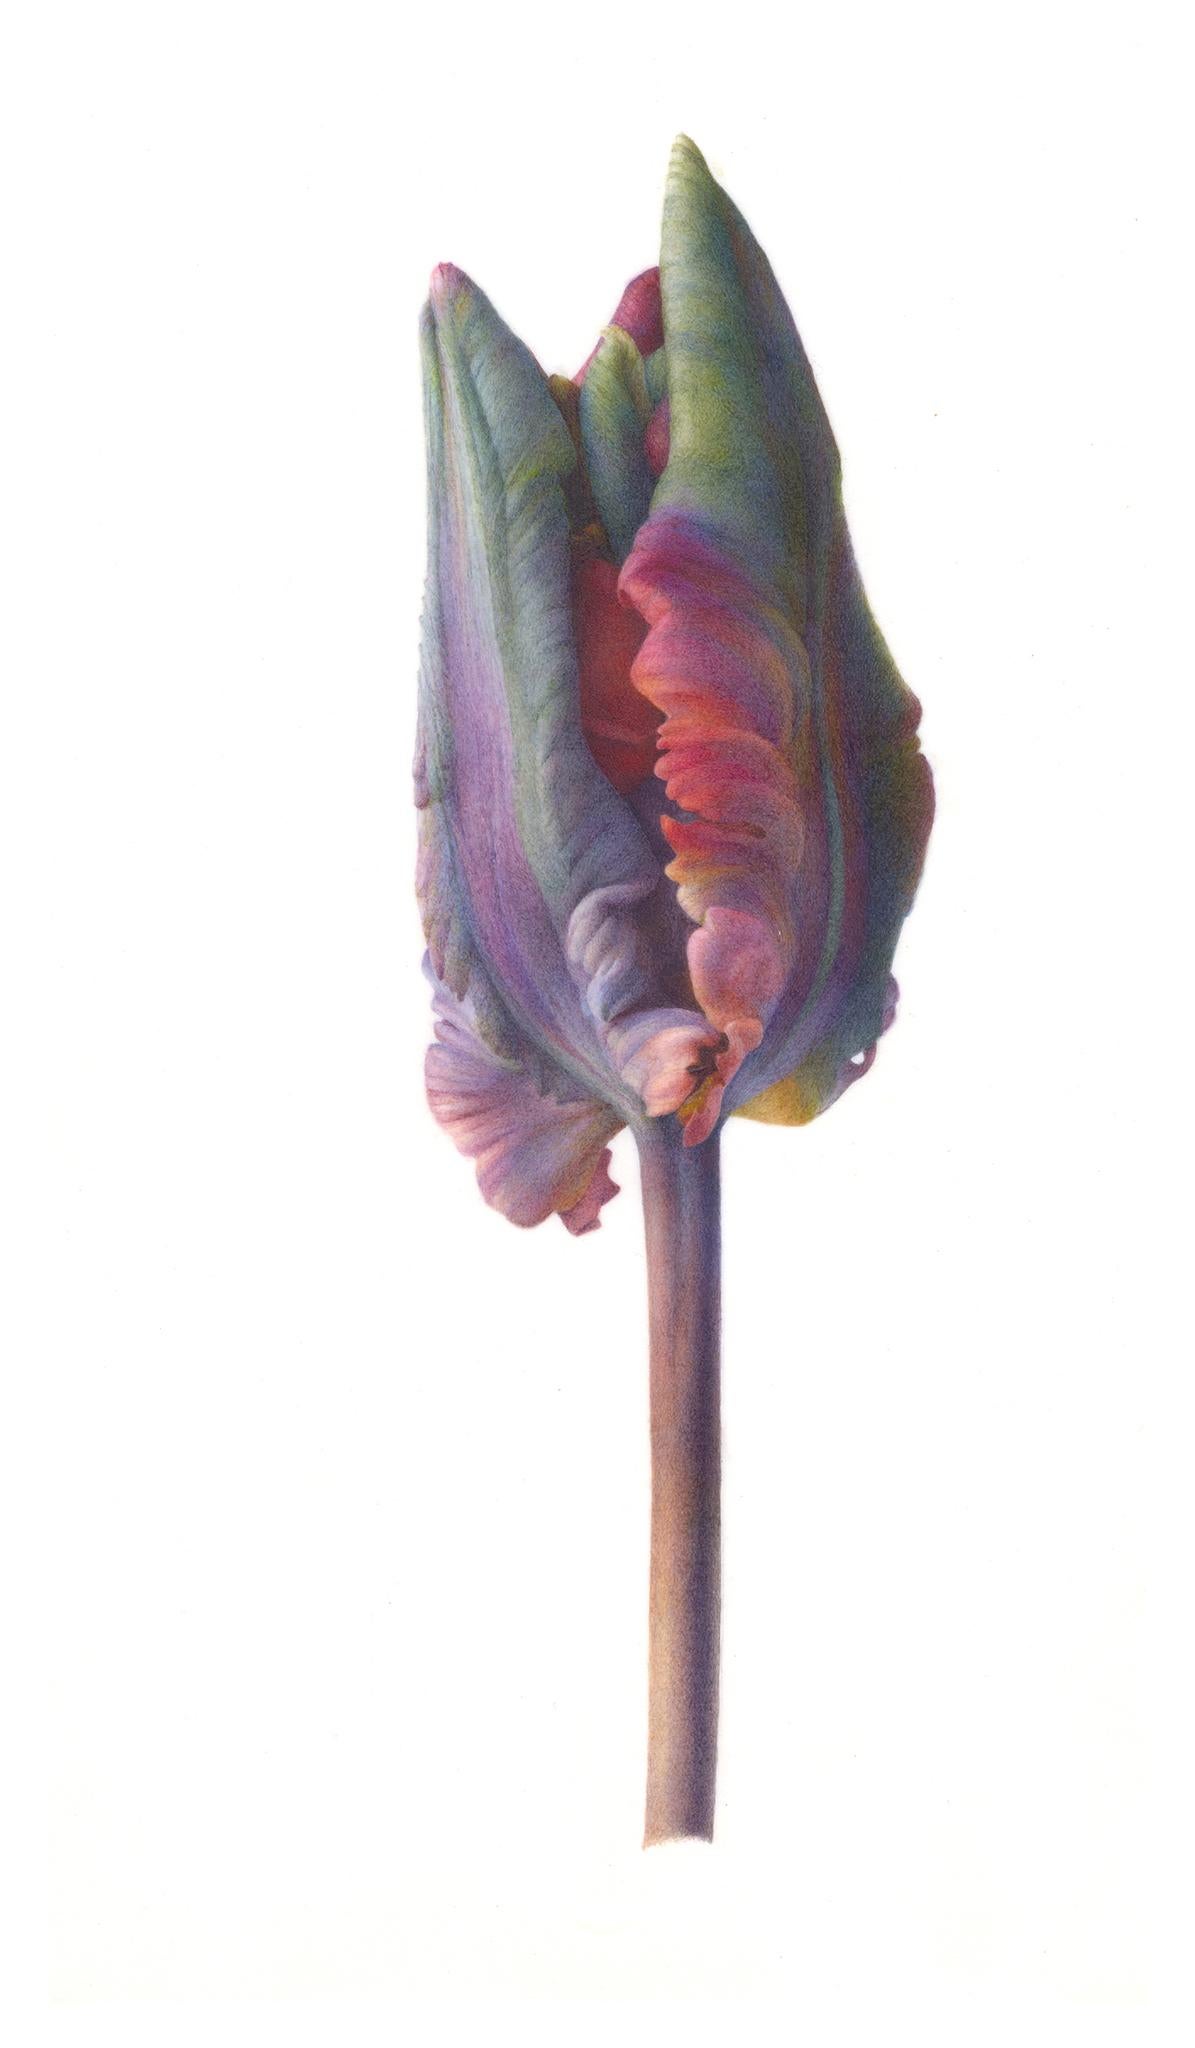 BUD PORTRAIT (TULIPA ‘BLUMEX PARROT’) - Painting by Fiona Strickland